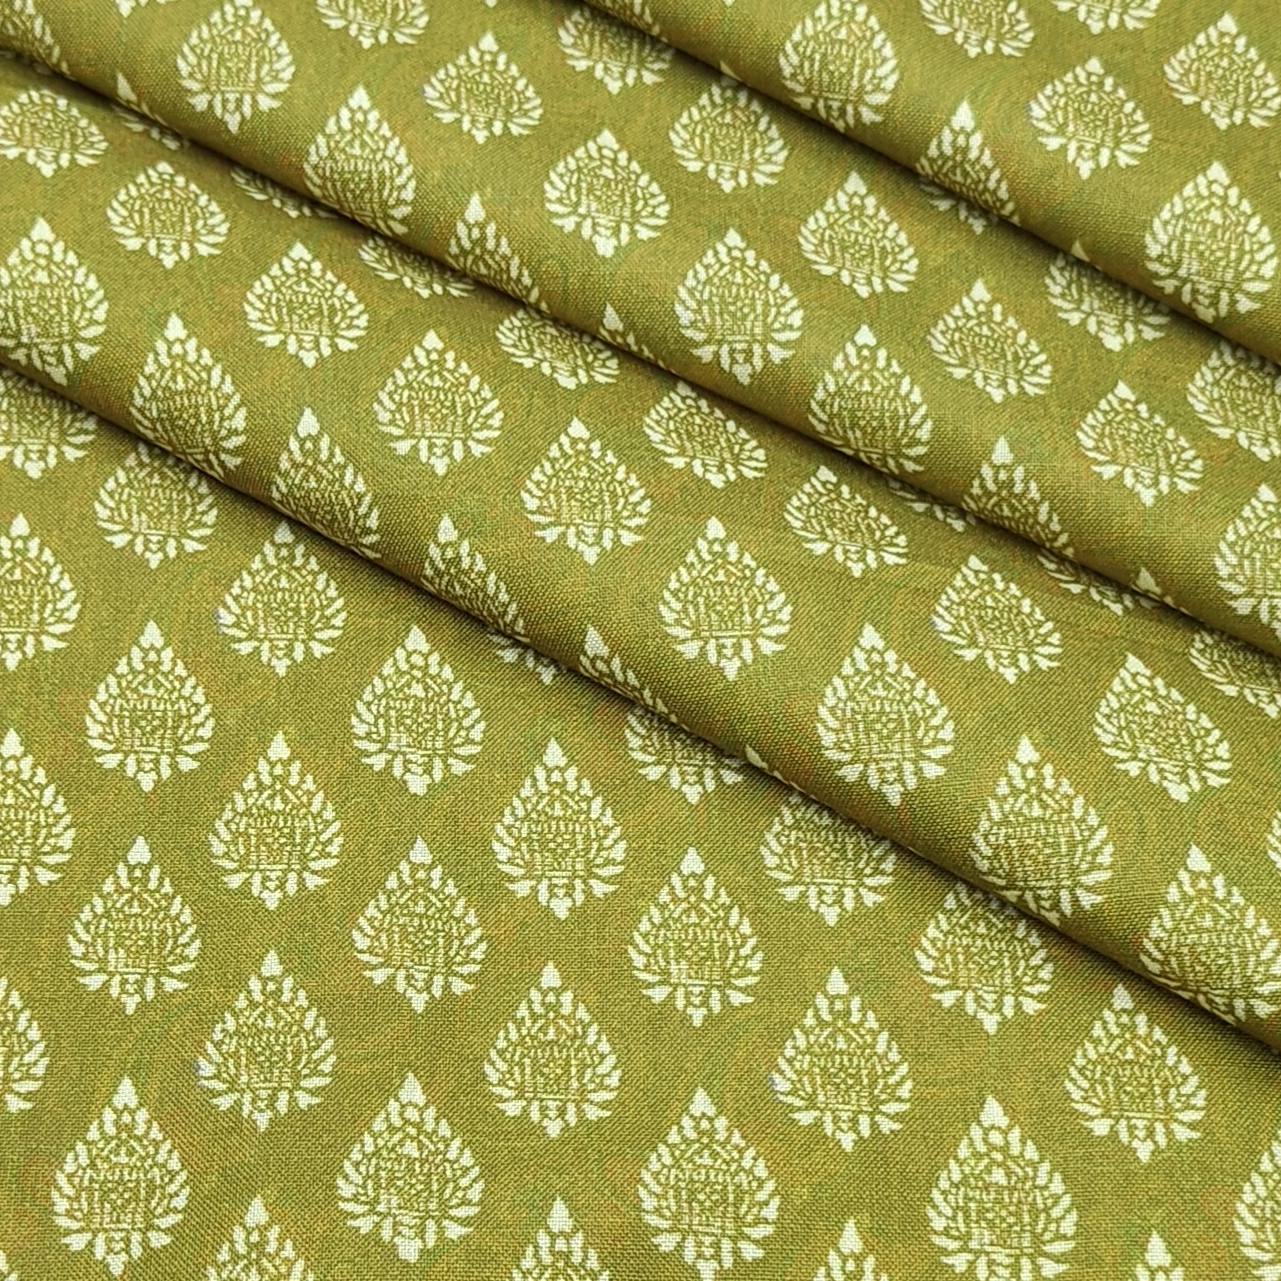 Mantire Special Cotton Blended Floral Fabric for shirt and short Kurta colour Chilli Green